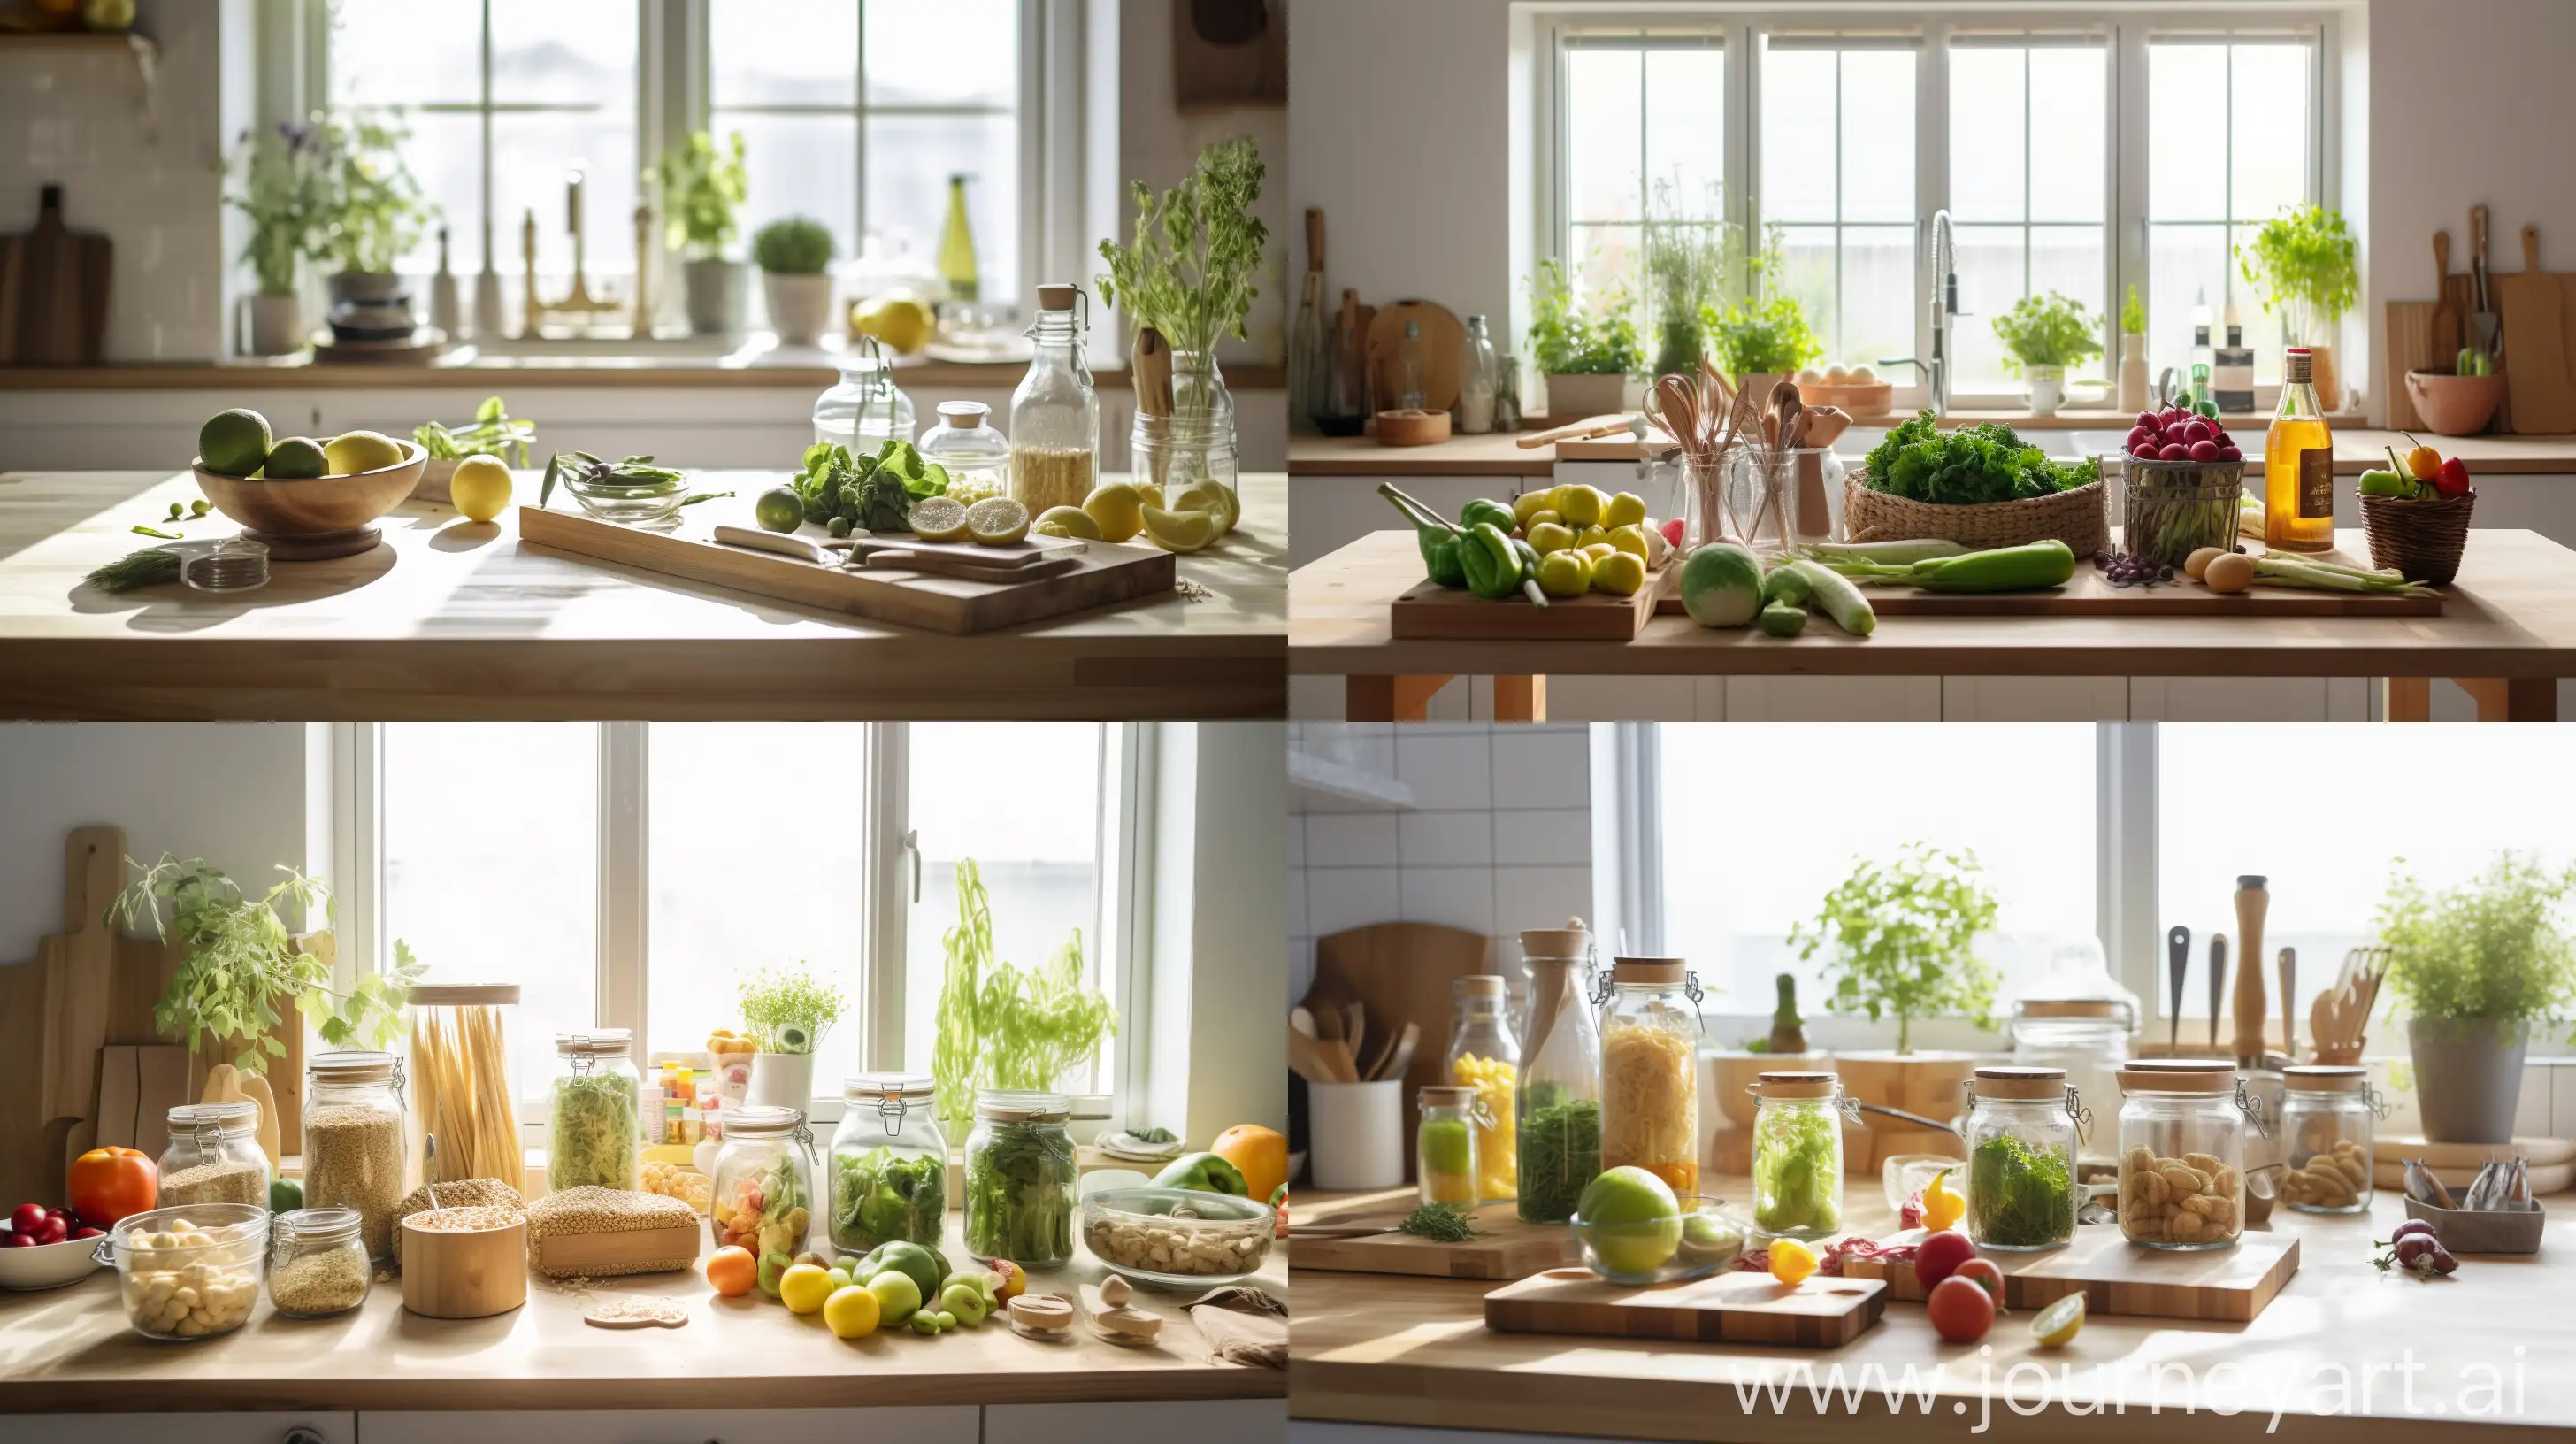 EcoFriendly-Kitchen-Transformation-with-Sustainable-Materials-and-Fresh-Produce